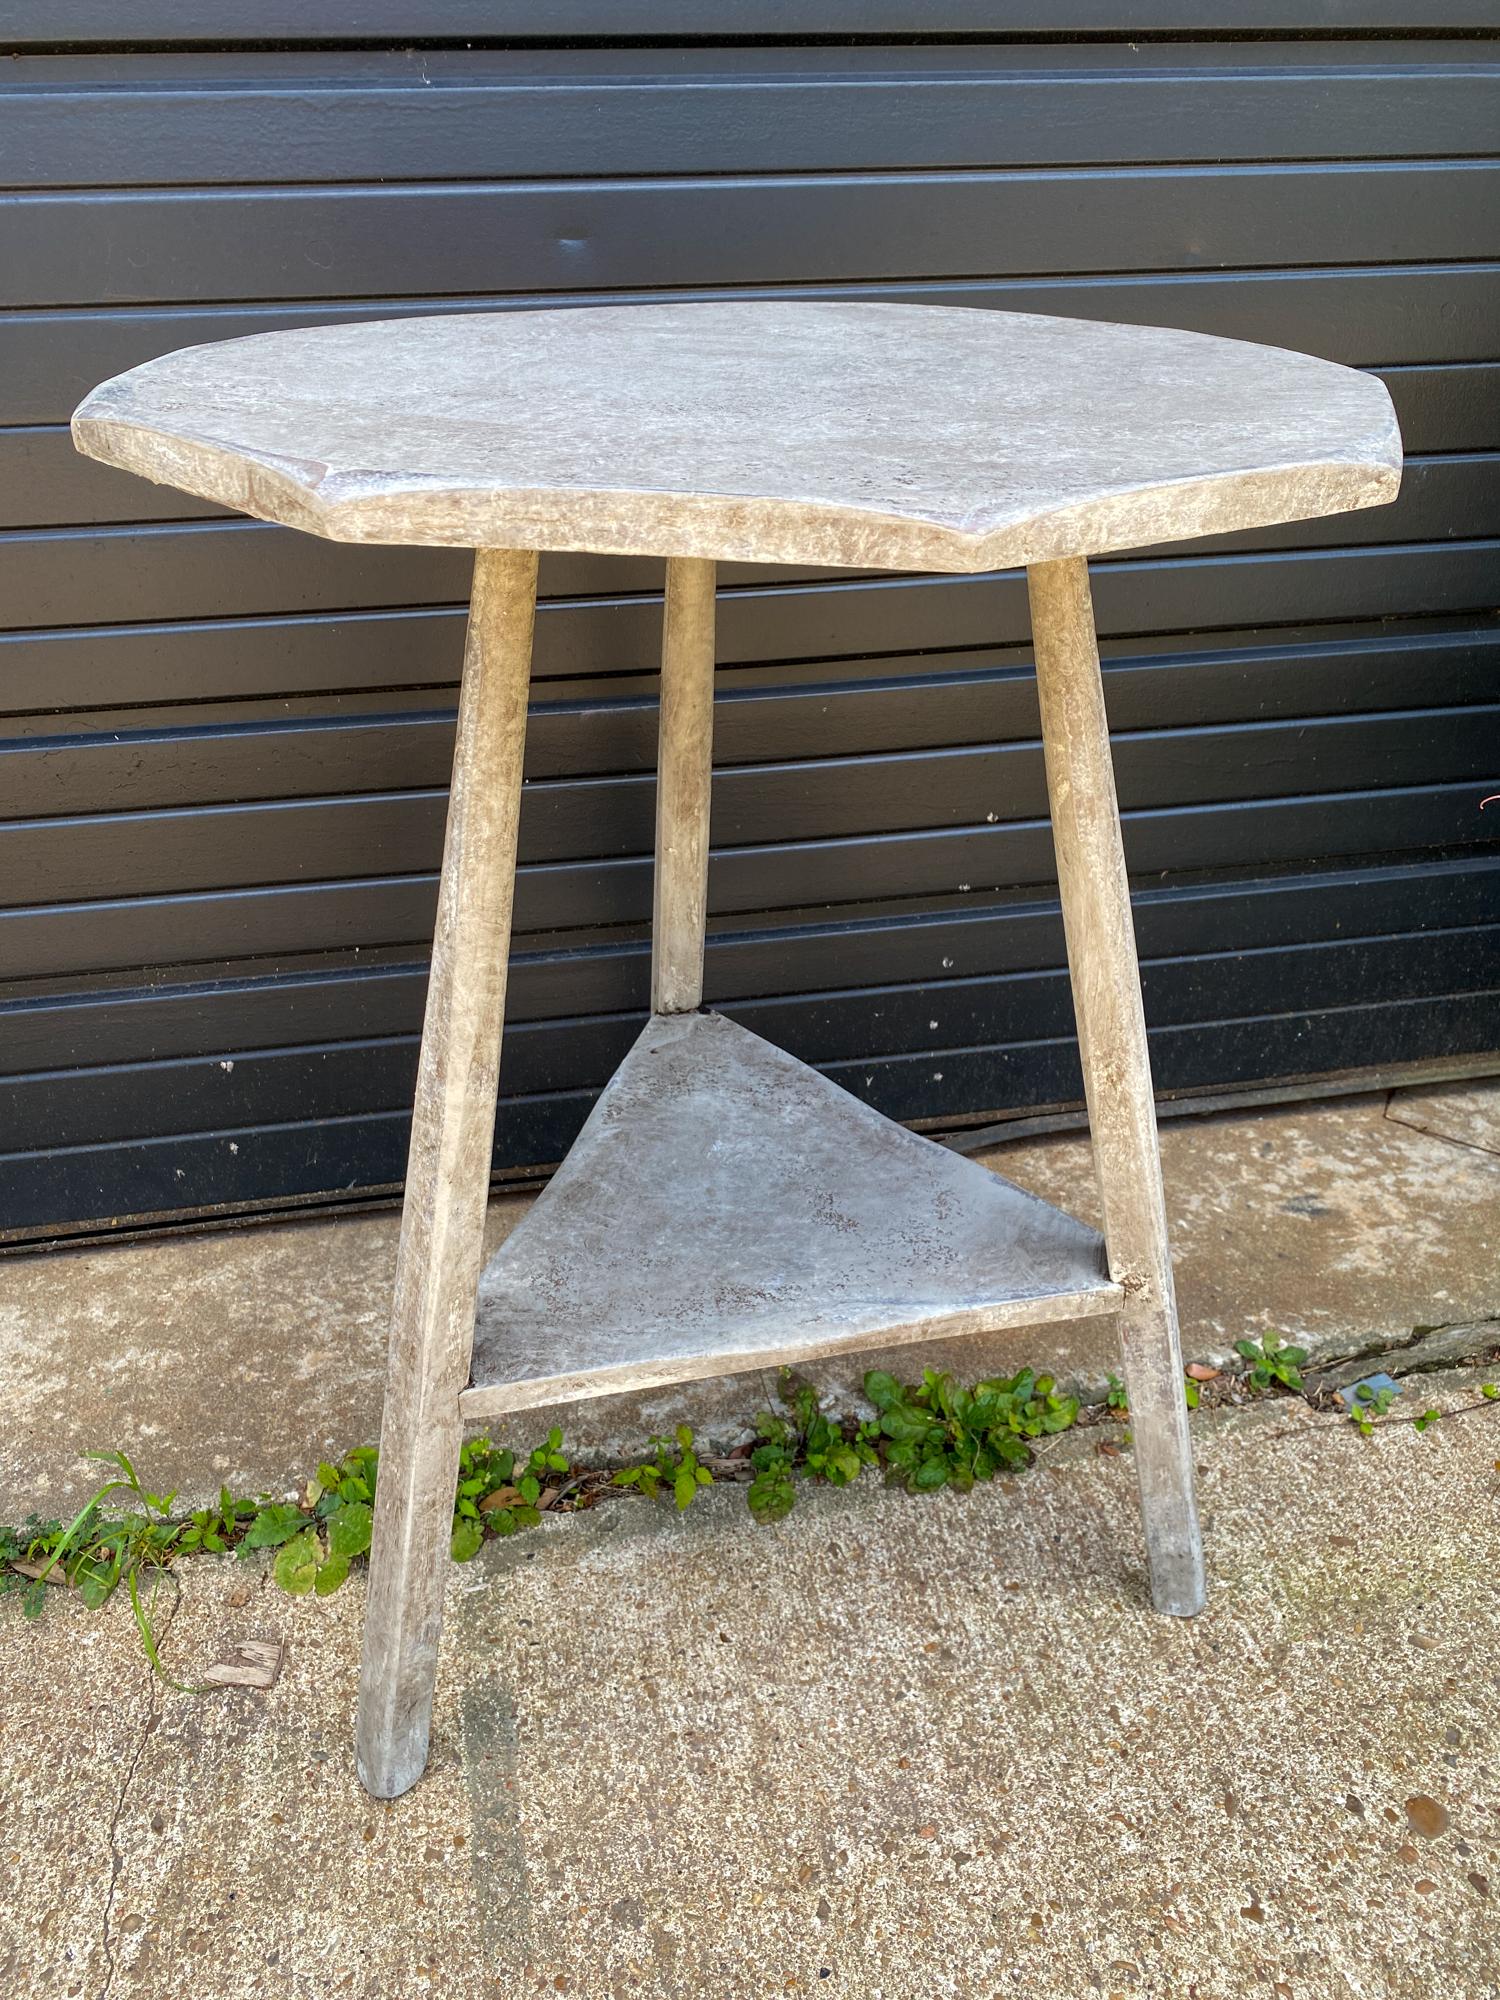 This is an antique French maple cricket table in a newly hand painted greige finish. The top is octagonal (typically cricket tables are made with a round top, so this is more unique) and the under tier is triangular, set between the legs. The lines